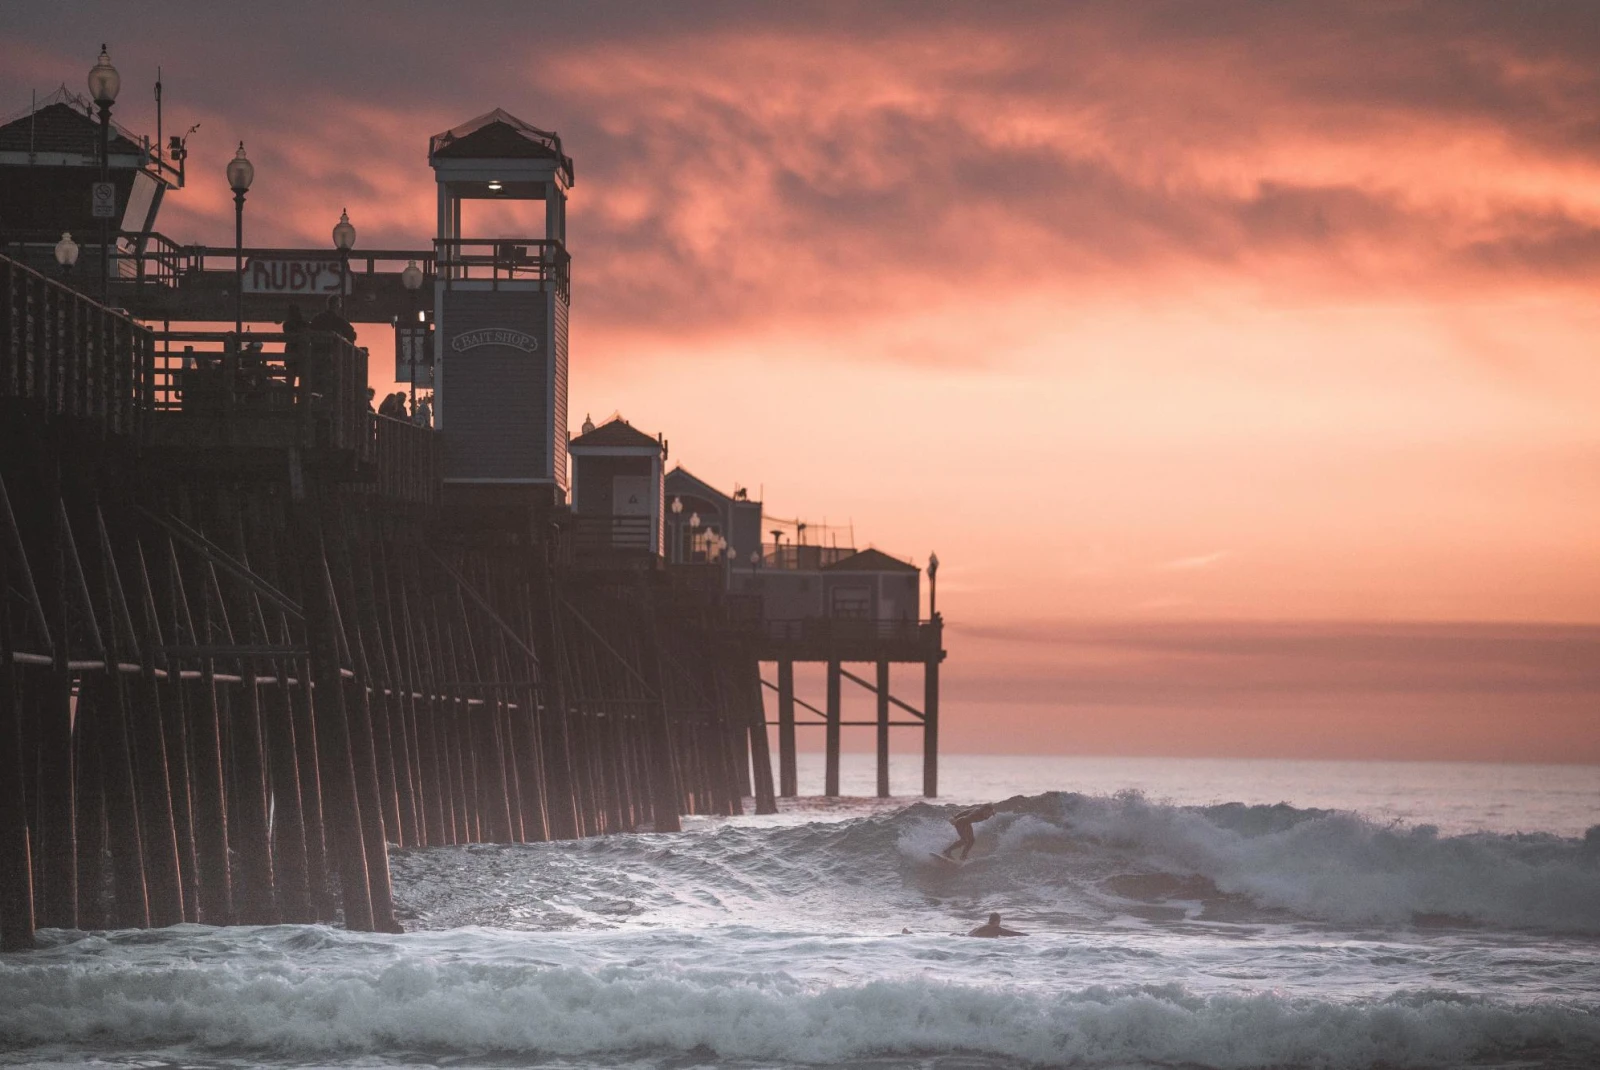 Waves crashing on legs of the pier in Oceanside during cloudy orange sunset.